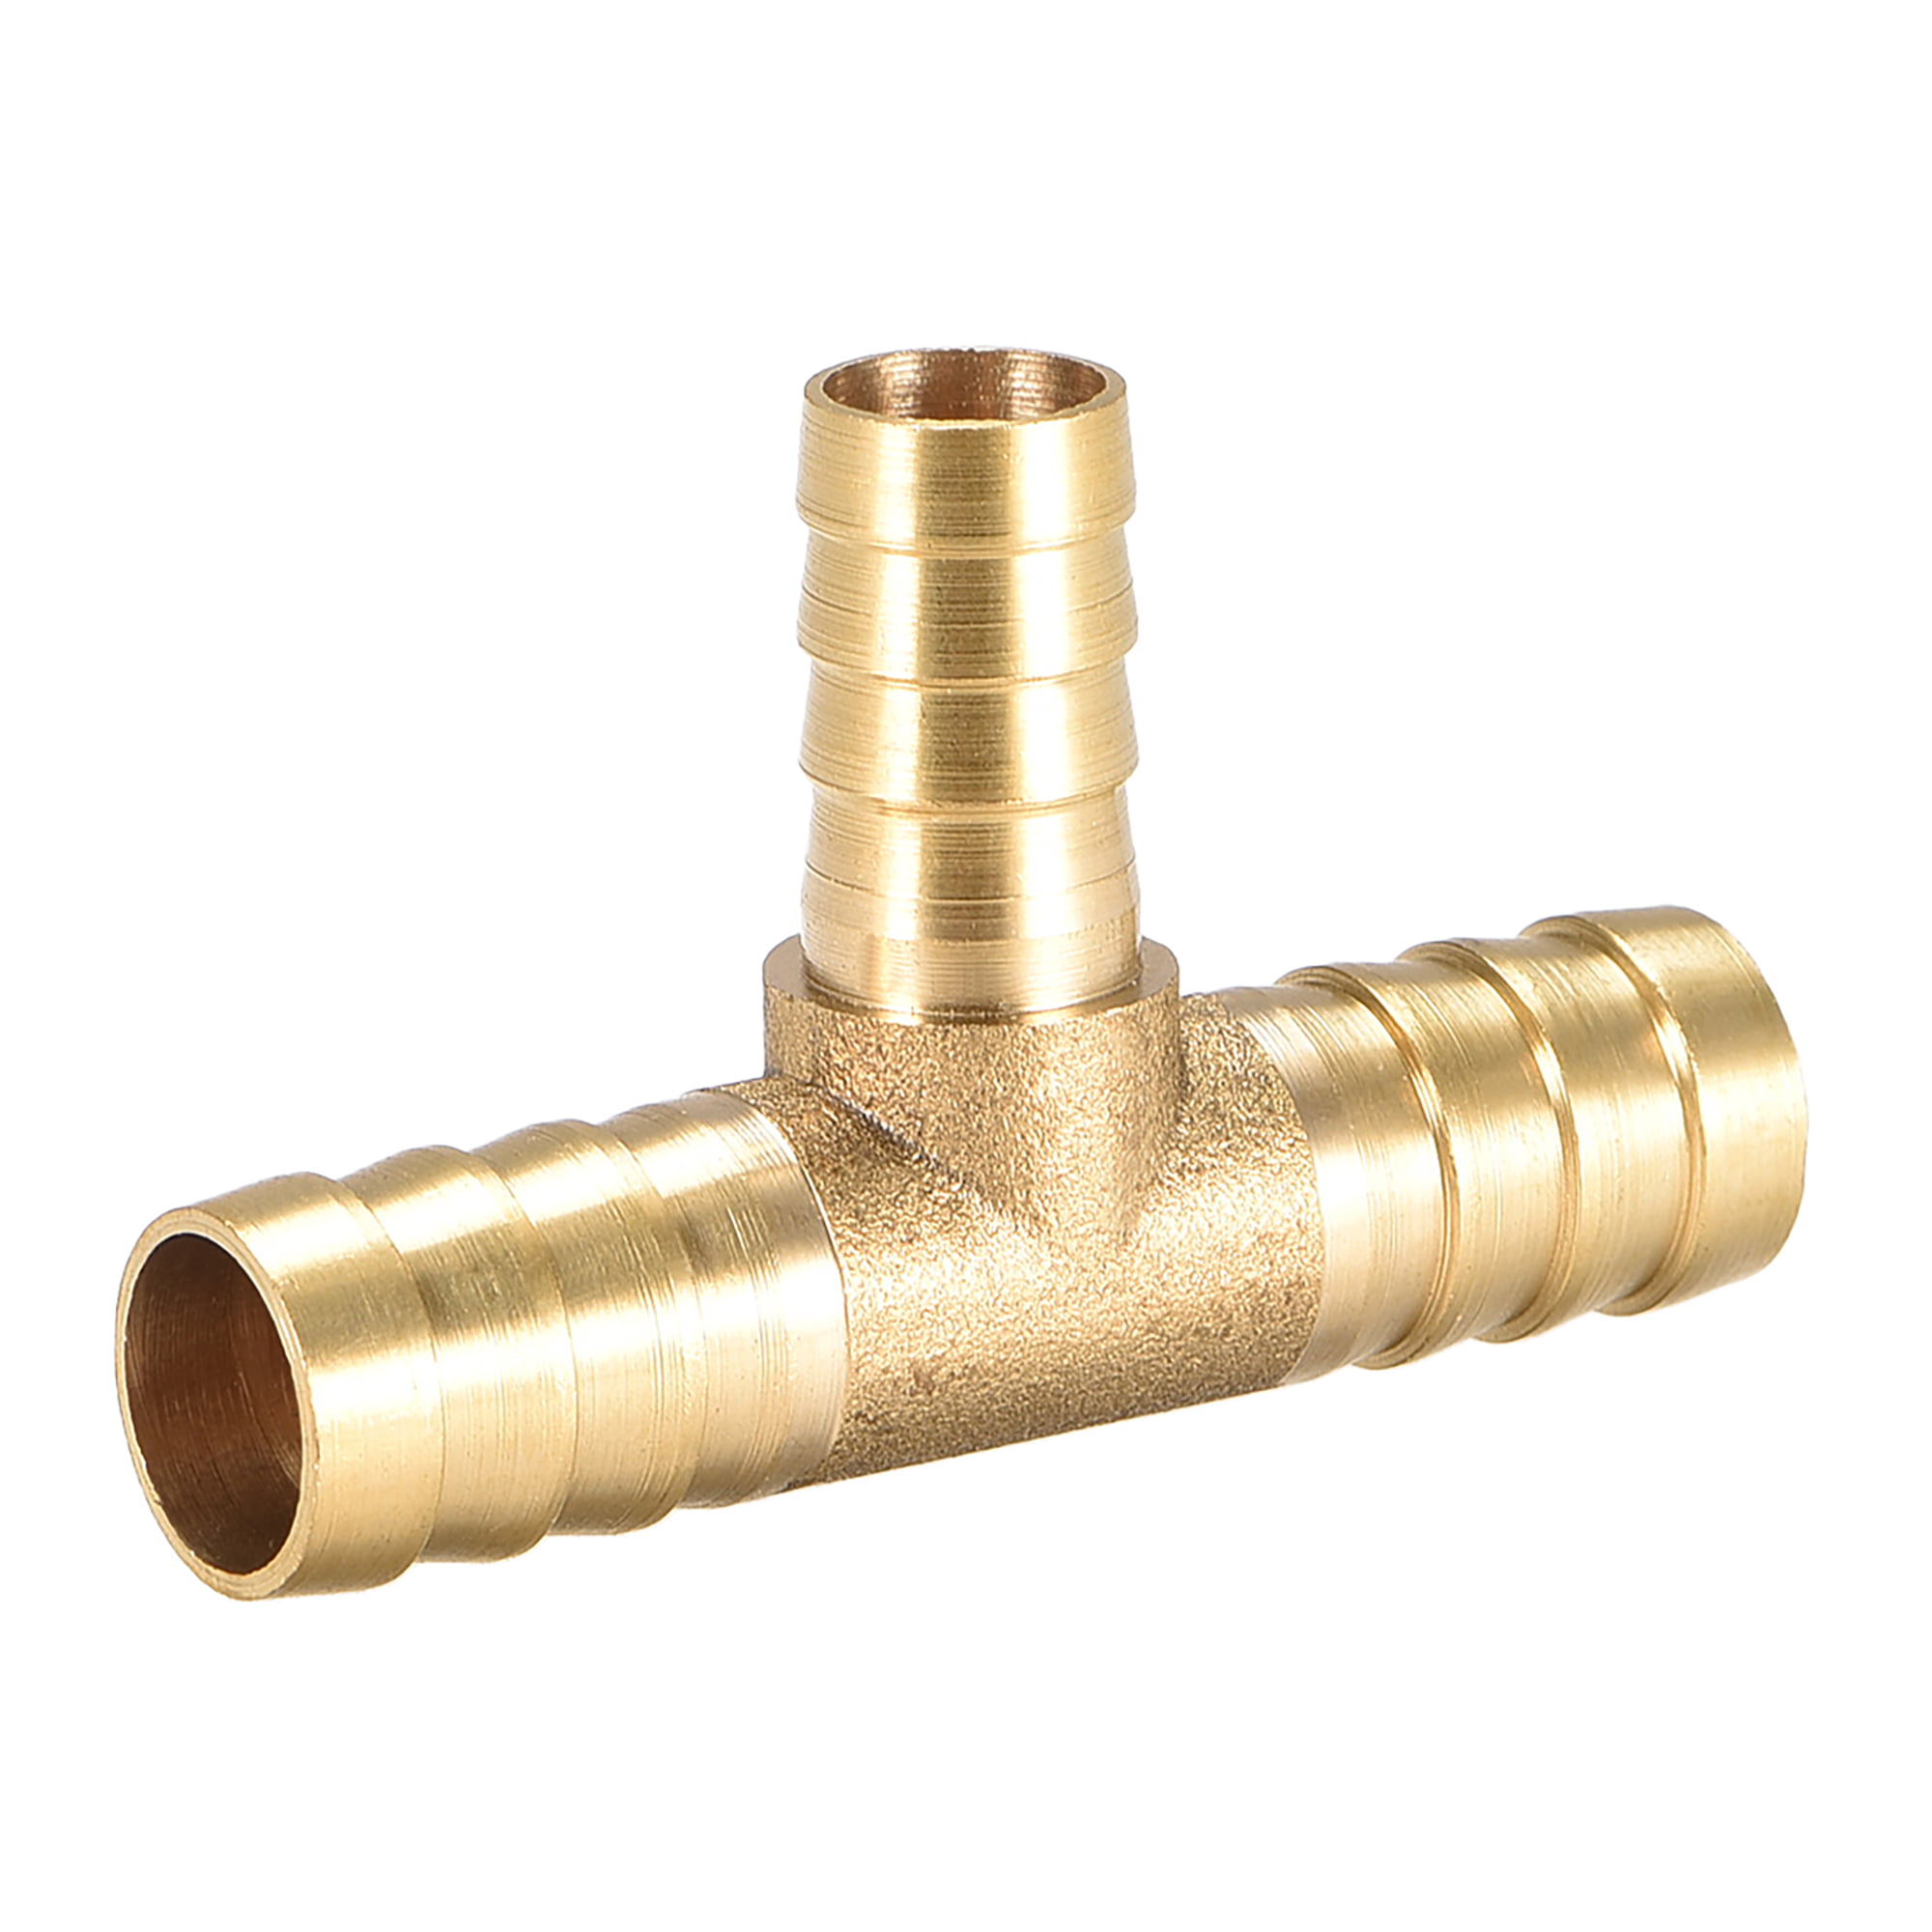 6 X BRASS 10mm x 8mm COMPRESSION PIPE FITTING STRAIGHT REDUCER CONNECTORS 